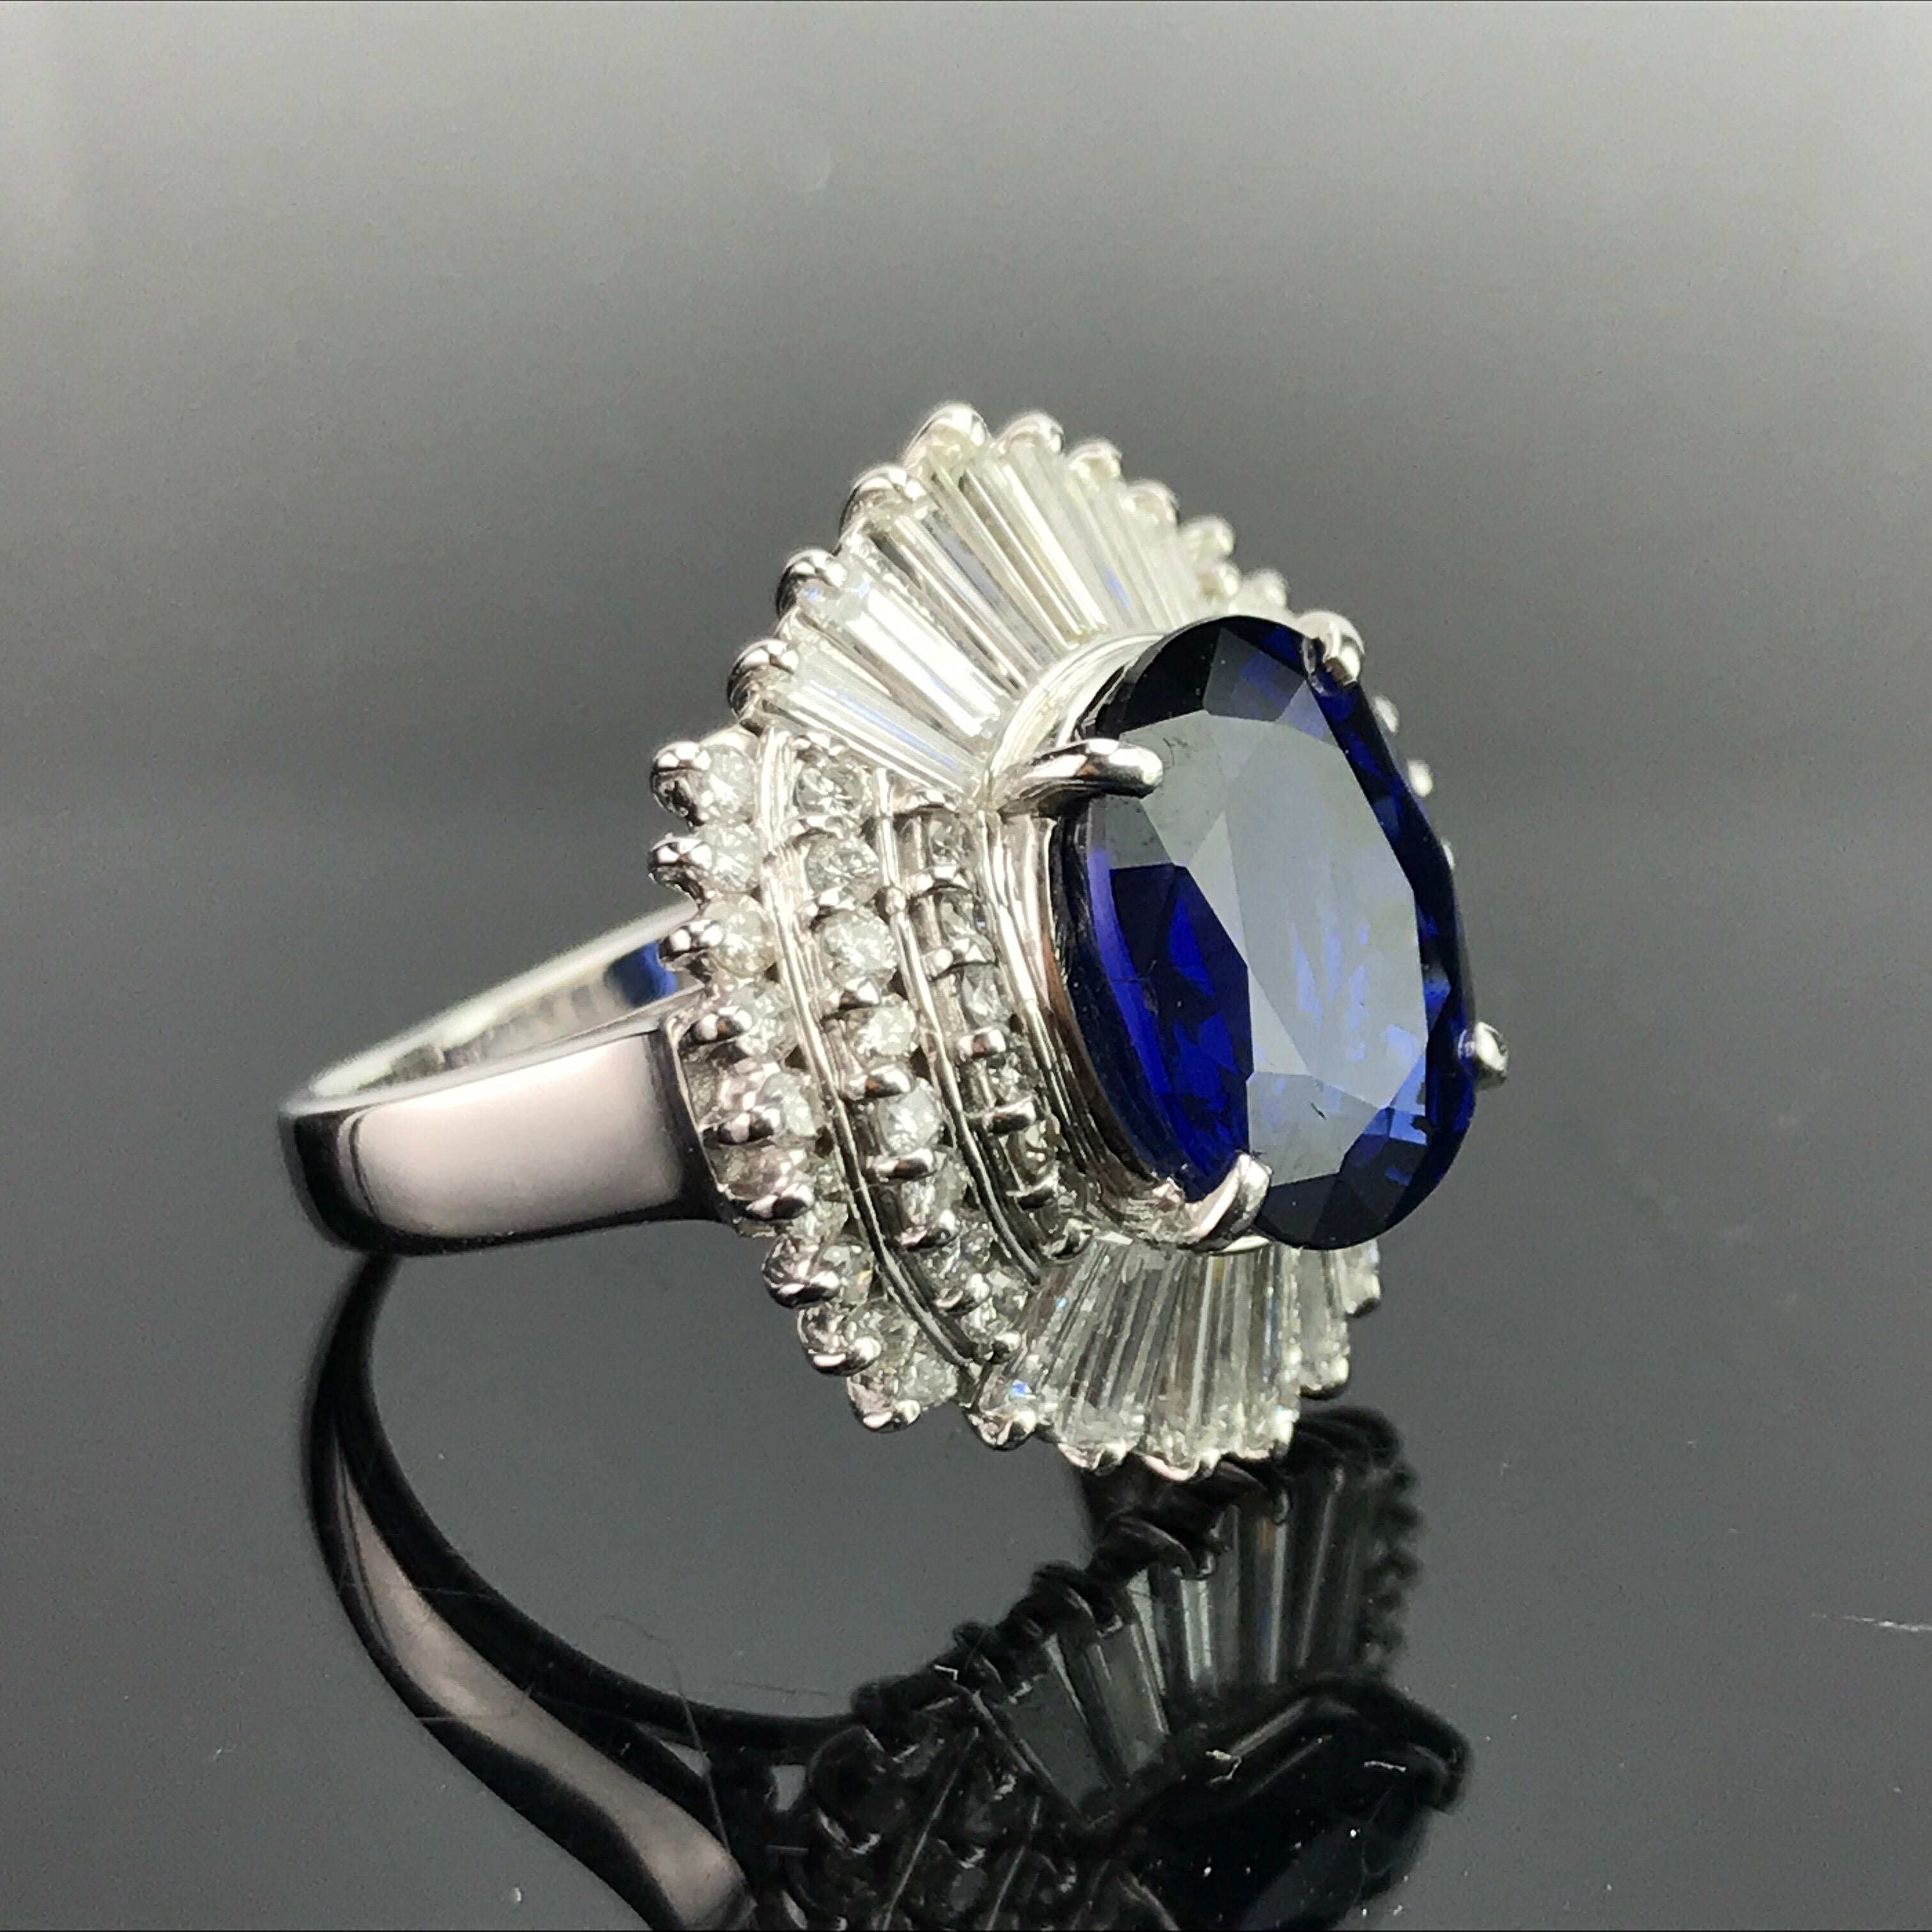 A beautiful, art-deco looking cocktail ring with 5.63 carat eye-clean, lustrous, Ceylon Blue Sapphire sorrounded by 1.69 carat White Diamond baguettes and brilliant cut, all set in platinum. 

Stone Details: 
Stone: Blue Sapphire
Cut: Oval
Carat